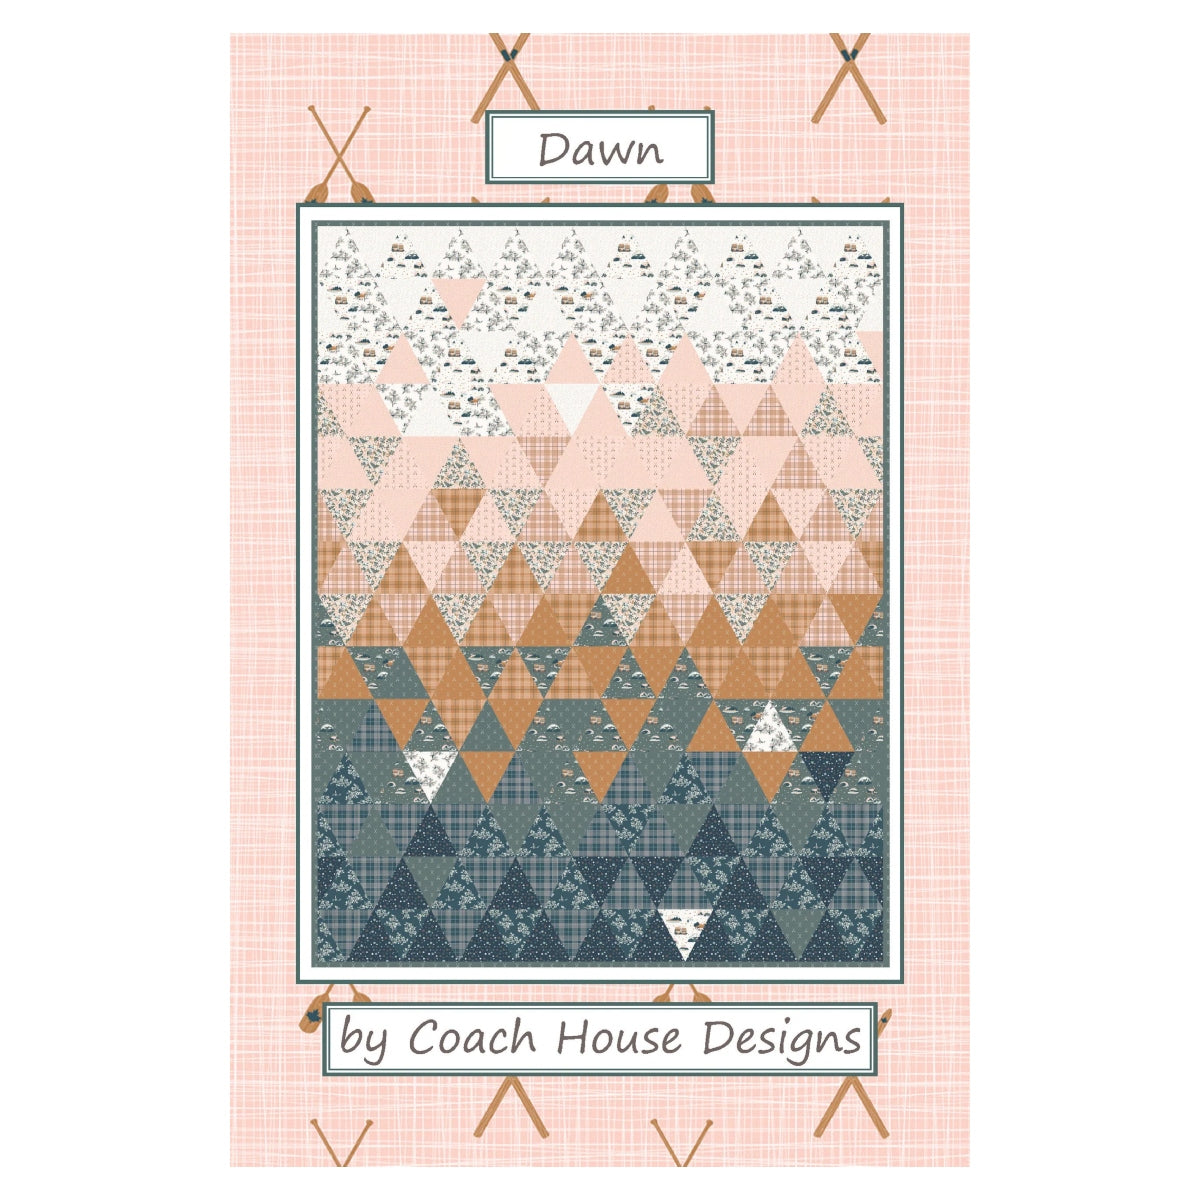 This 45" x 63" lap quilt features From Far and Wide by Kate & Birdie.  Triangles are cut with paper template included in the pattern and sewn together to create an ombre design.